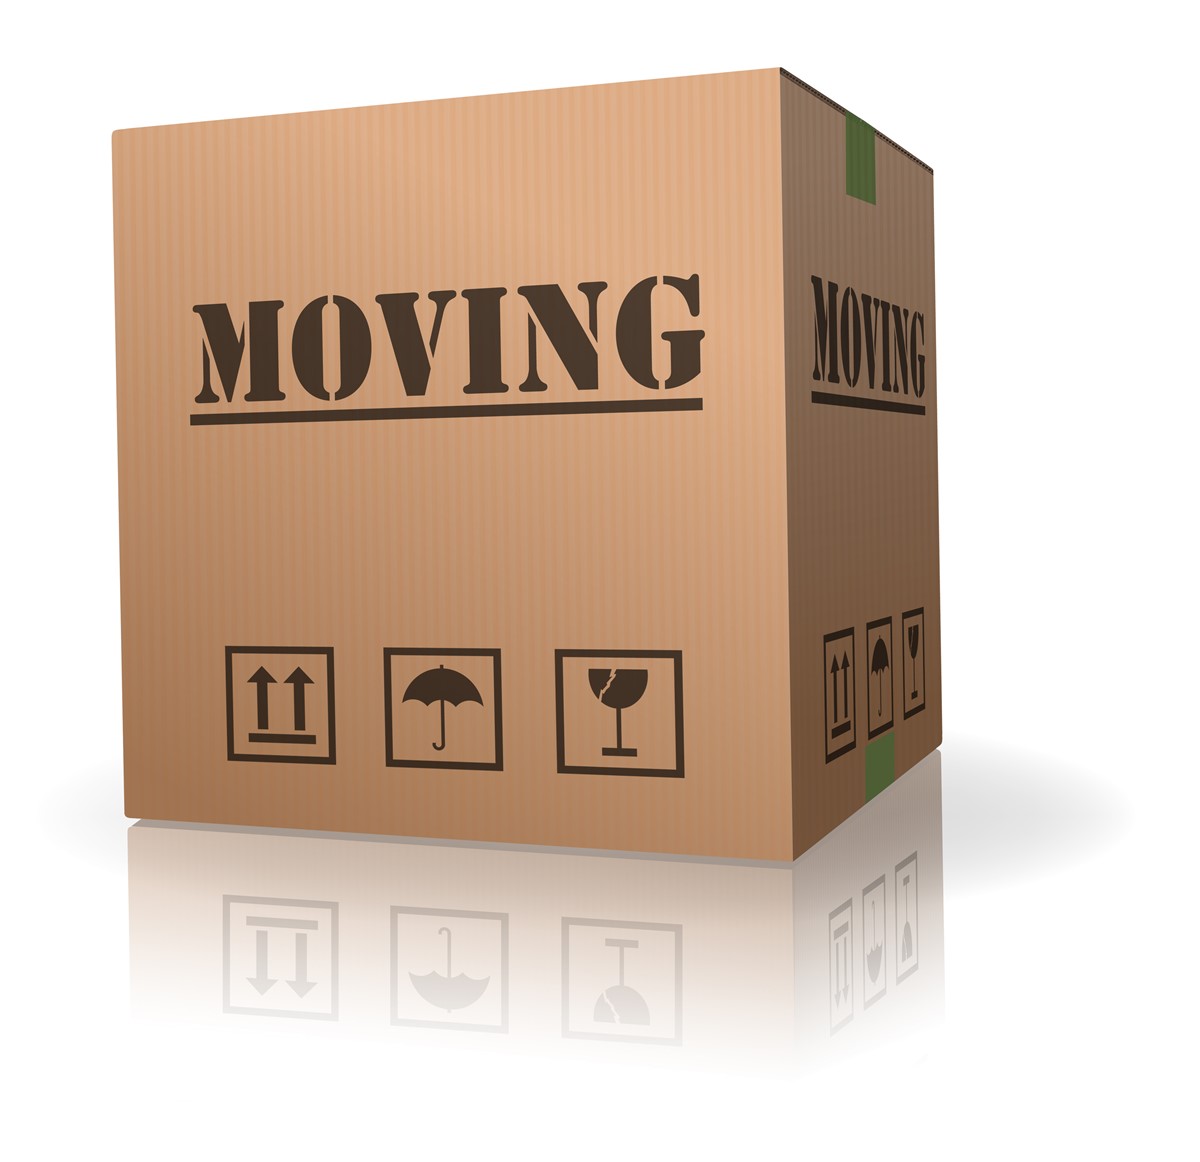 Tips For Choosing the Right Box for Your Move